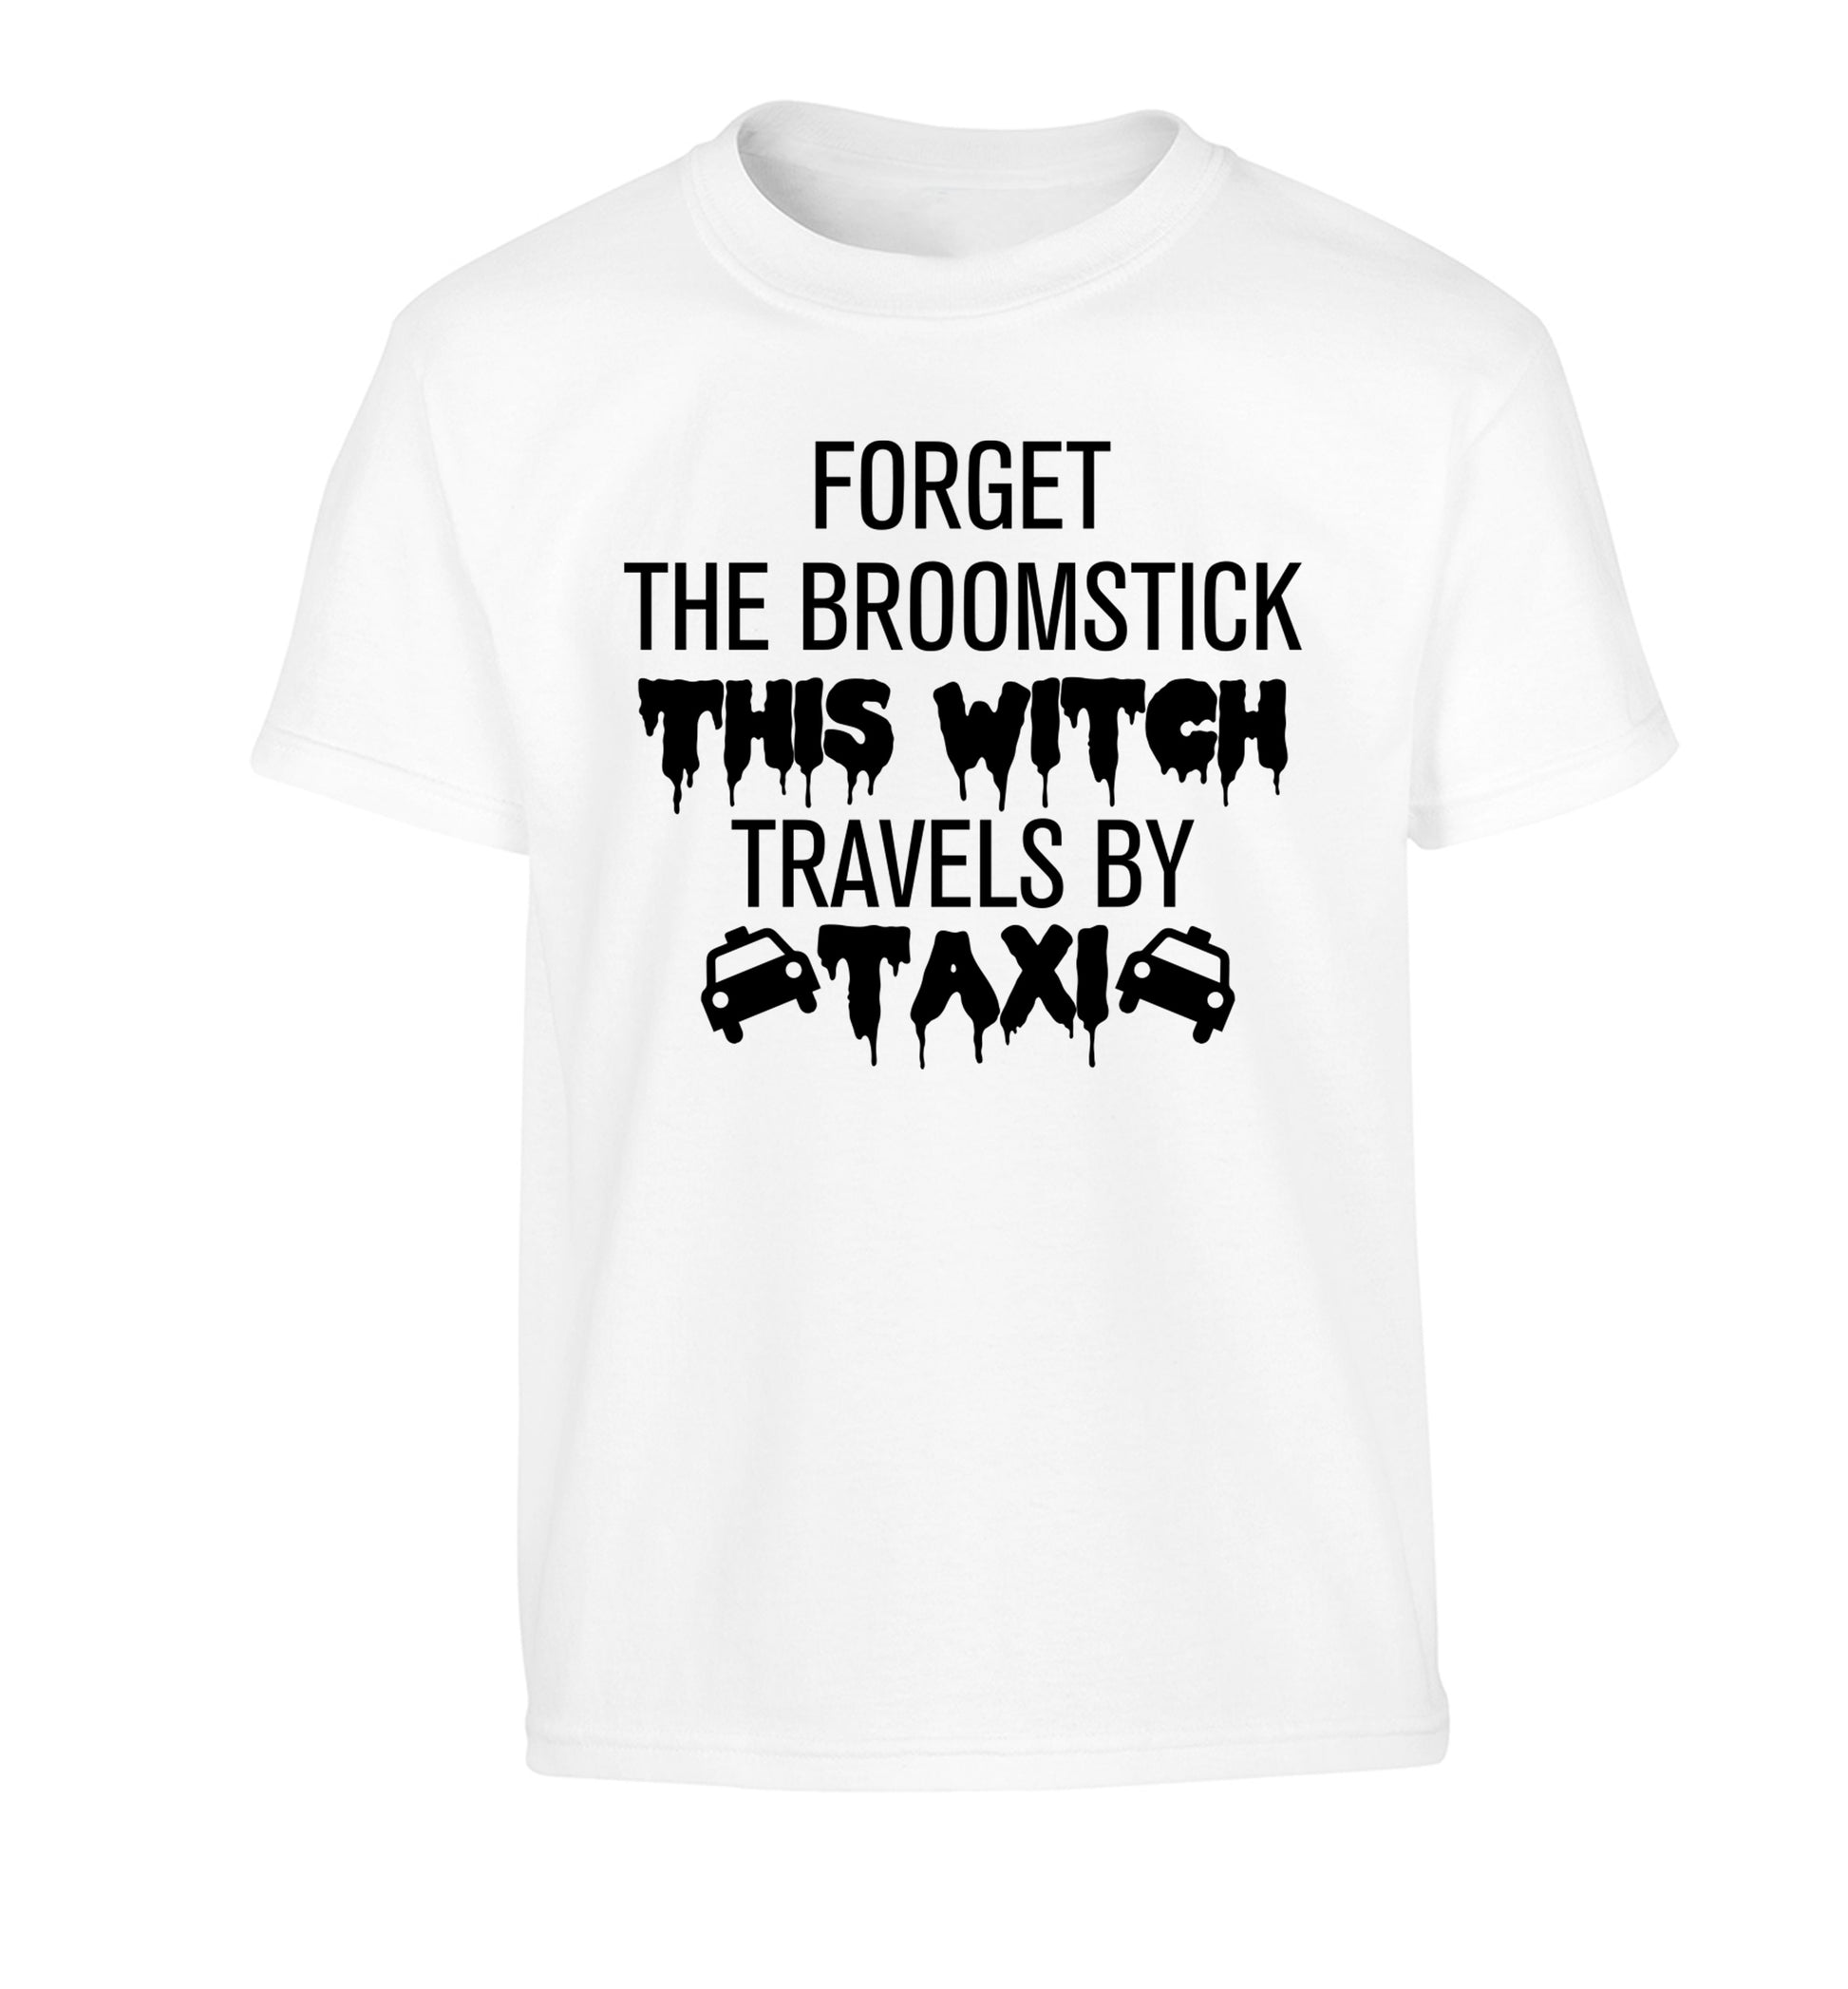 Forget the broomstick this witch travels by taxi Children's white Tshirt 12-14 Years